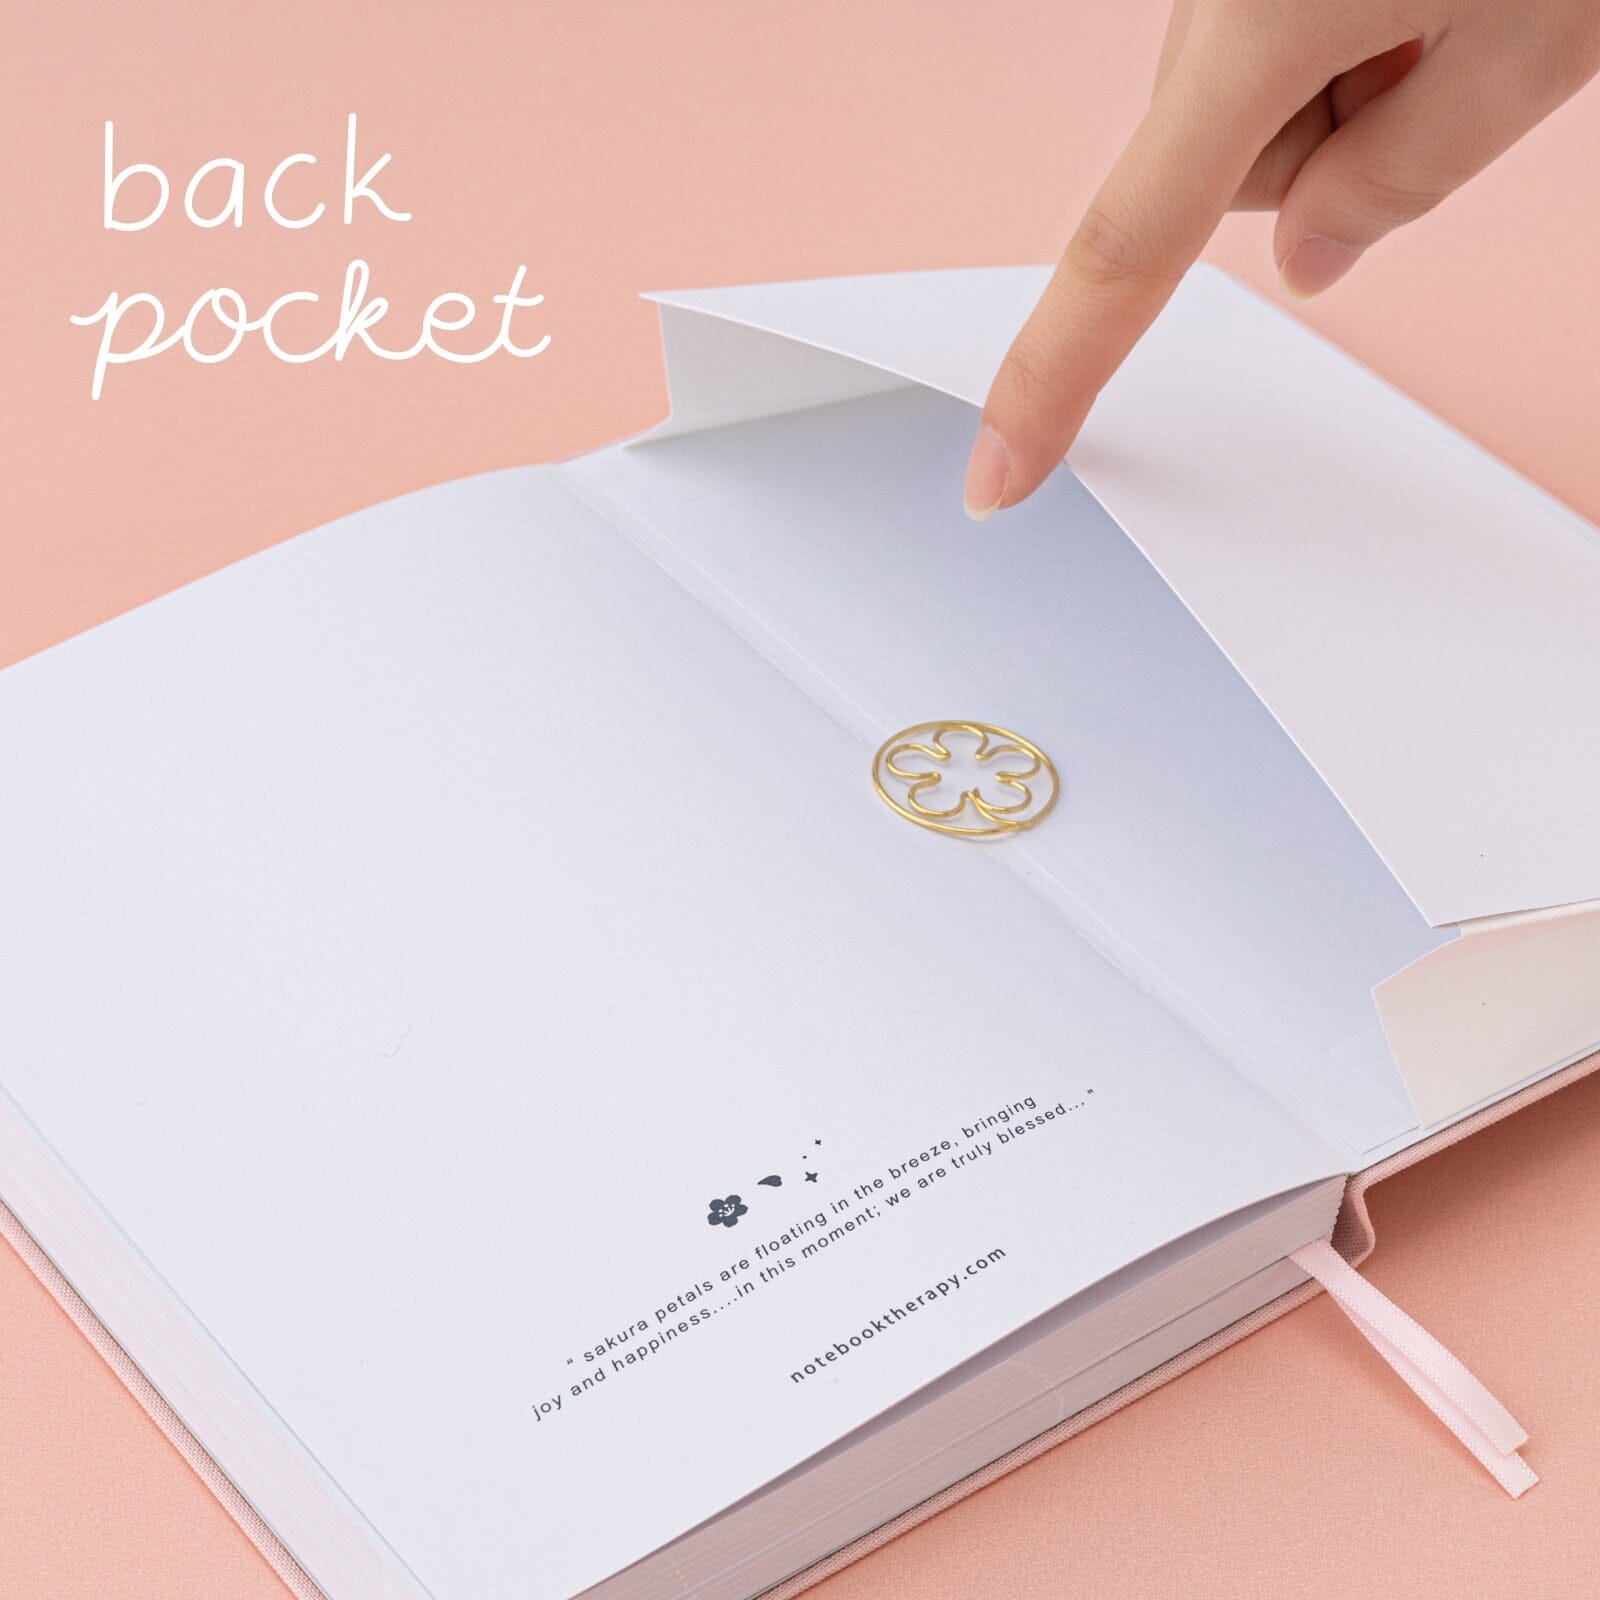 Back pocket of Tsuki Sakura Breeze limited edition bullet journal by Notebook Therapy with sakura paperclip inside